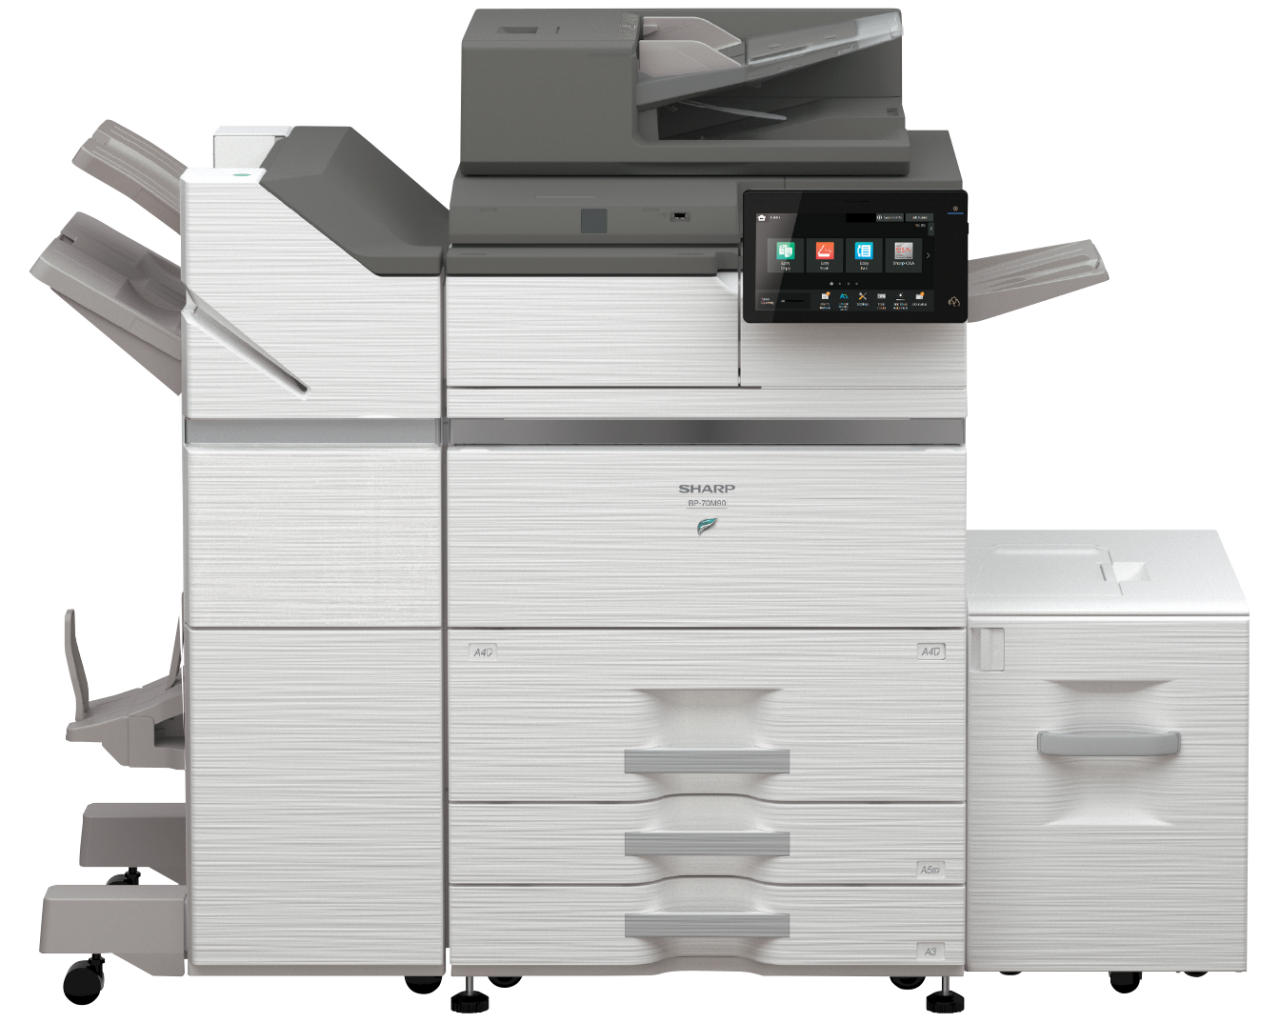 BP-70M90 - High-Volume Office and Light-Production Multifunction Office Printer - Sharp EIT Solutions